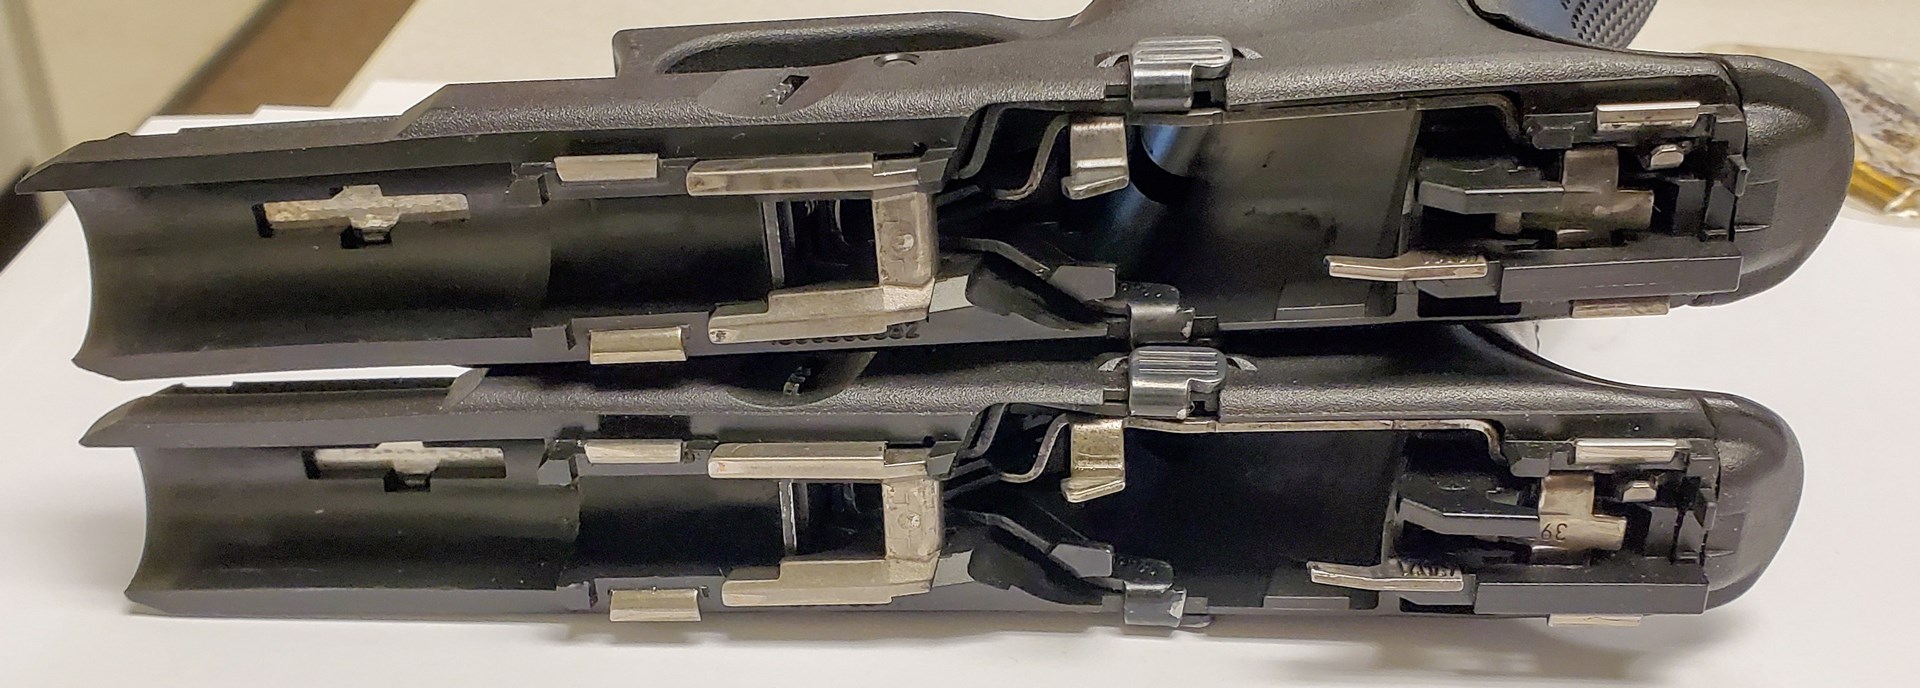 The G19 and G47 frames are the two frames with slides off to show that there is no difference in the two with regard to length, location, shape of the rails, locking block, etc.